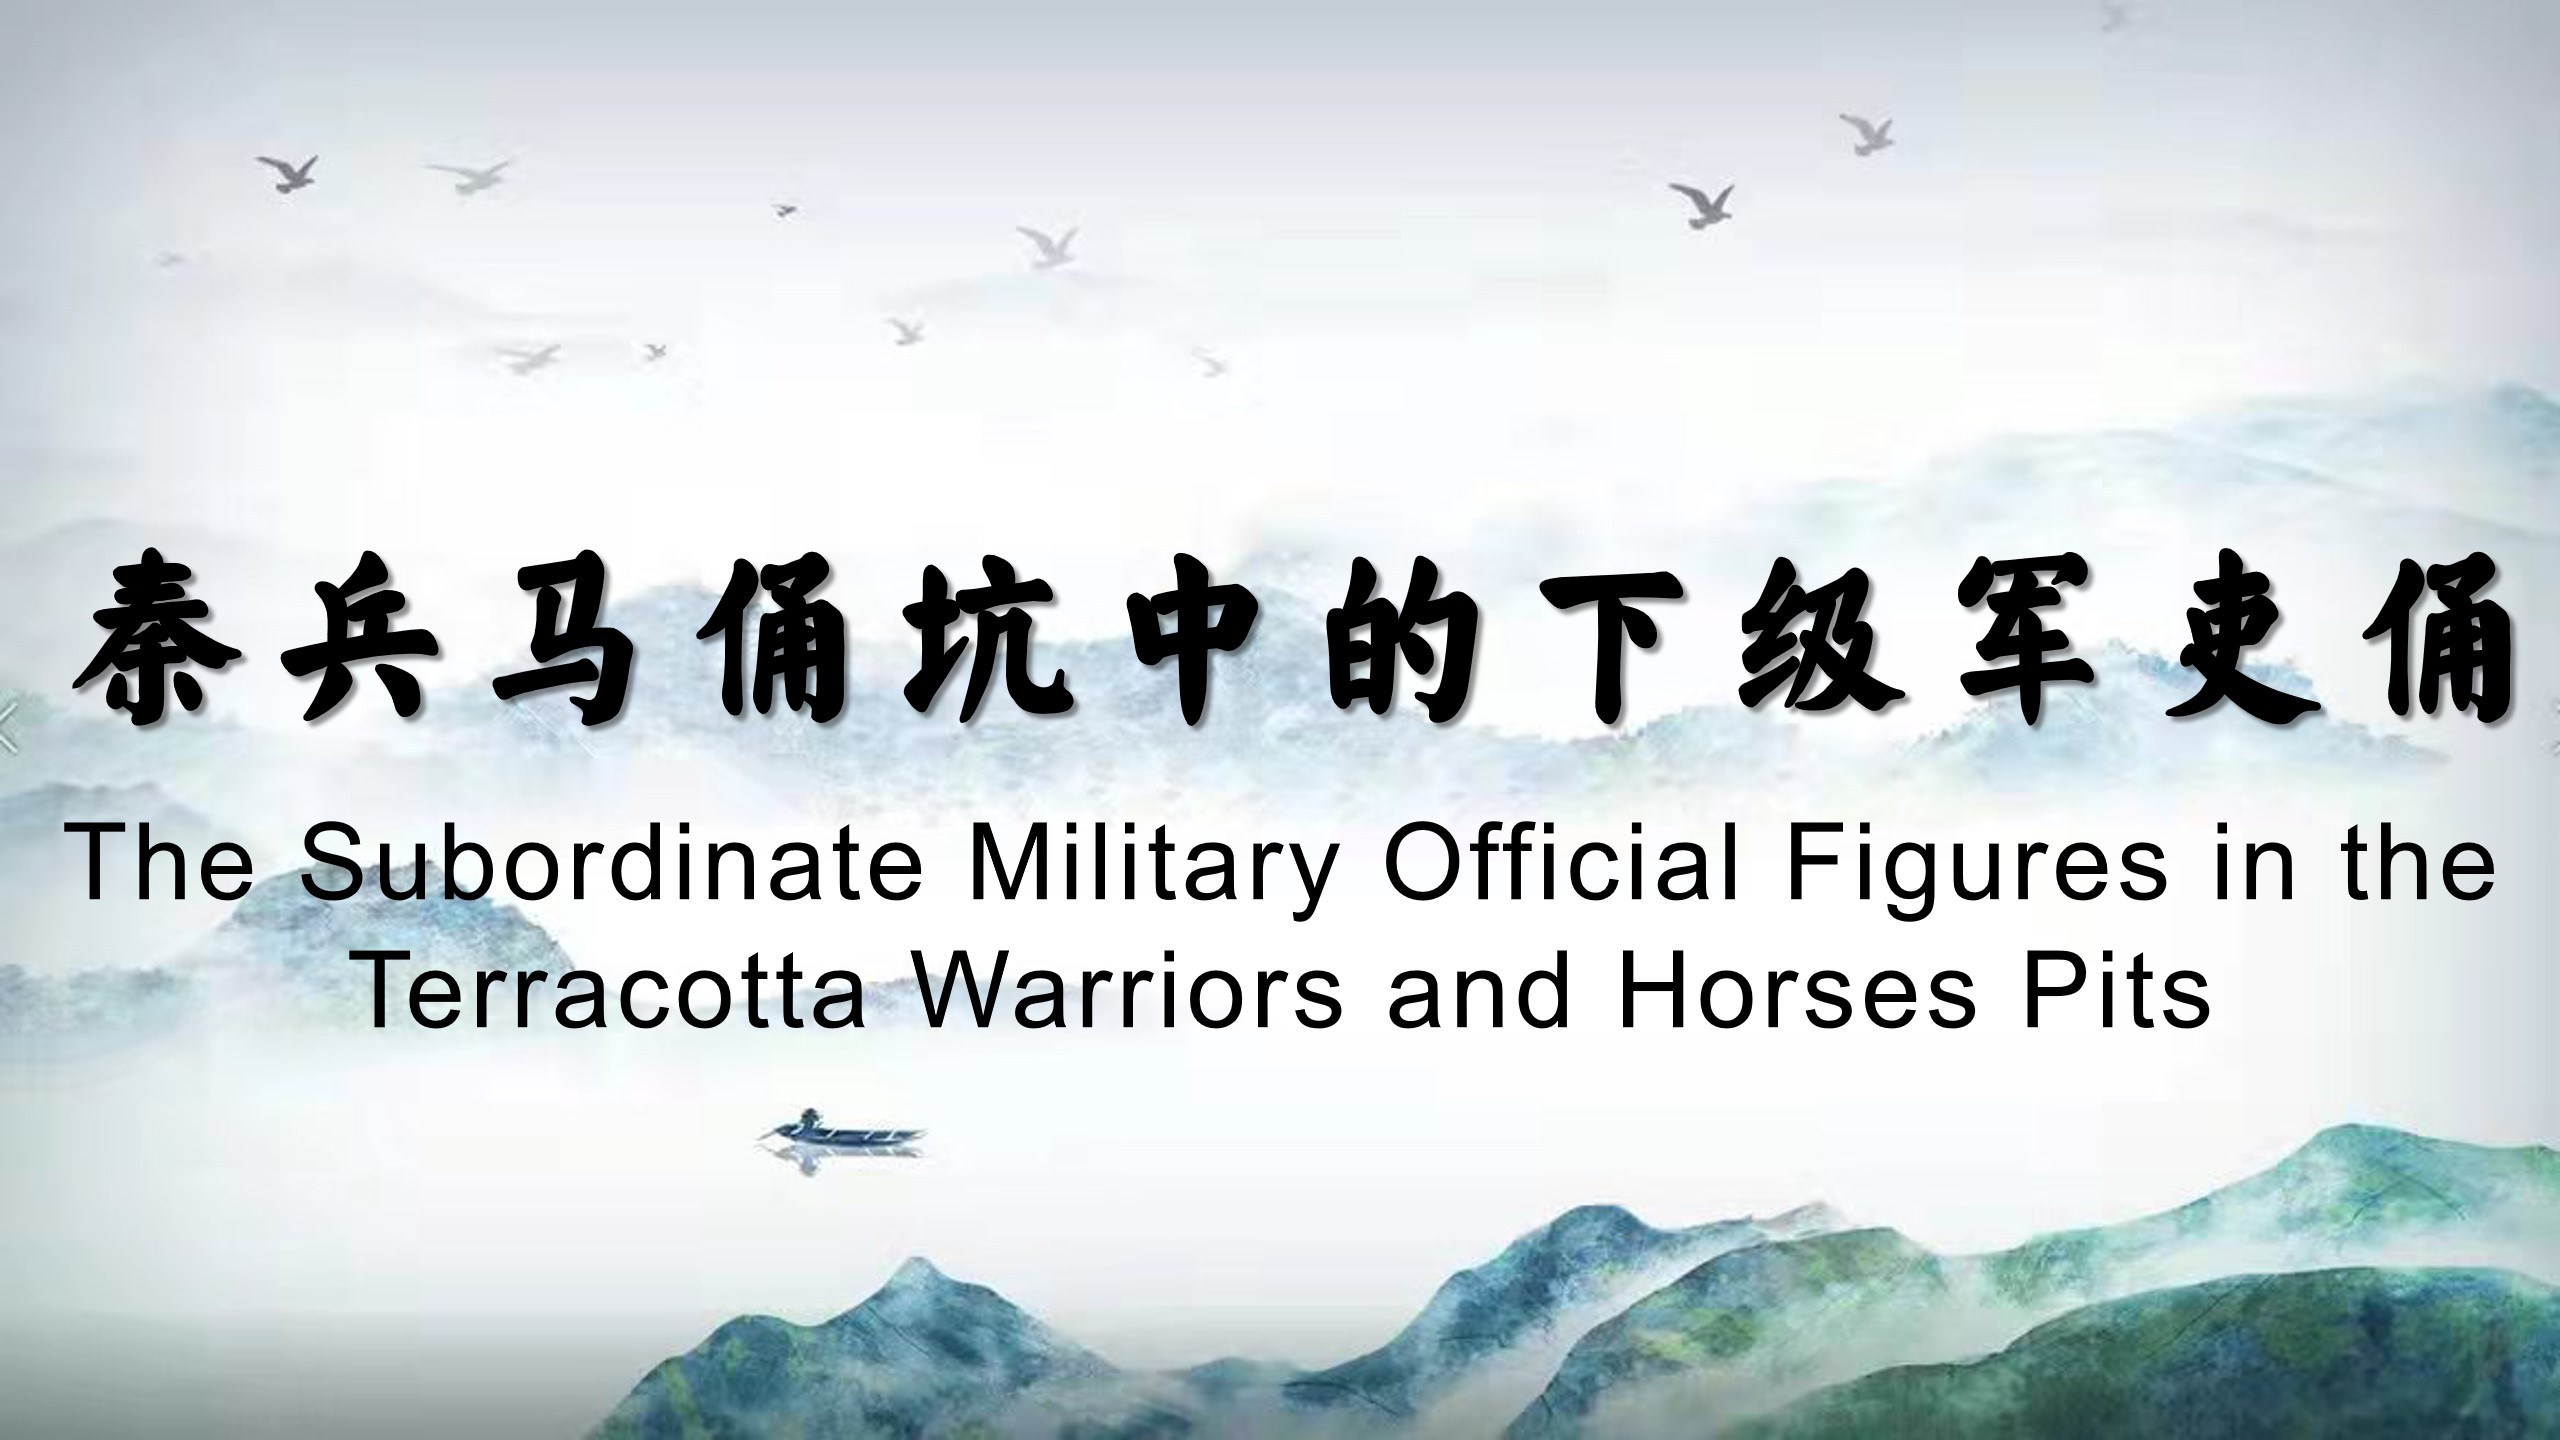 The Subordinate Military Official Figures in the Terracotta Warriors and Horses Pits